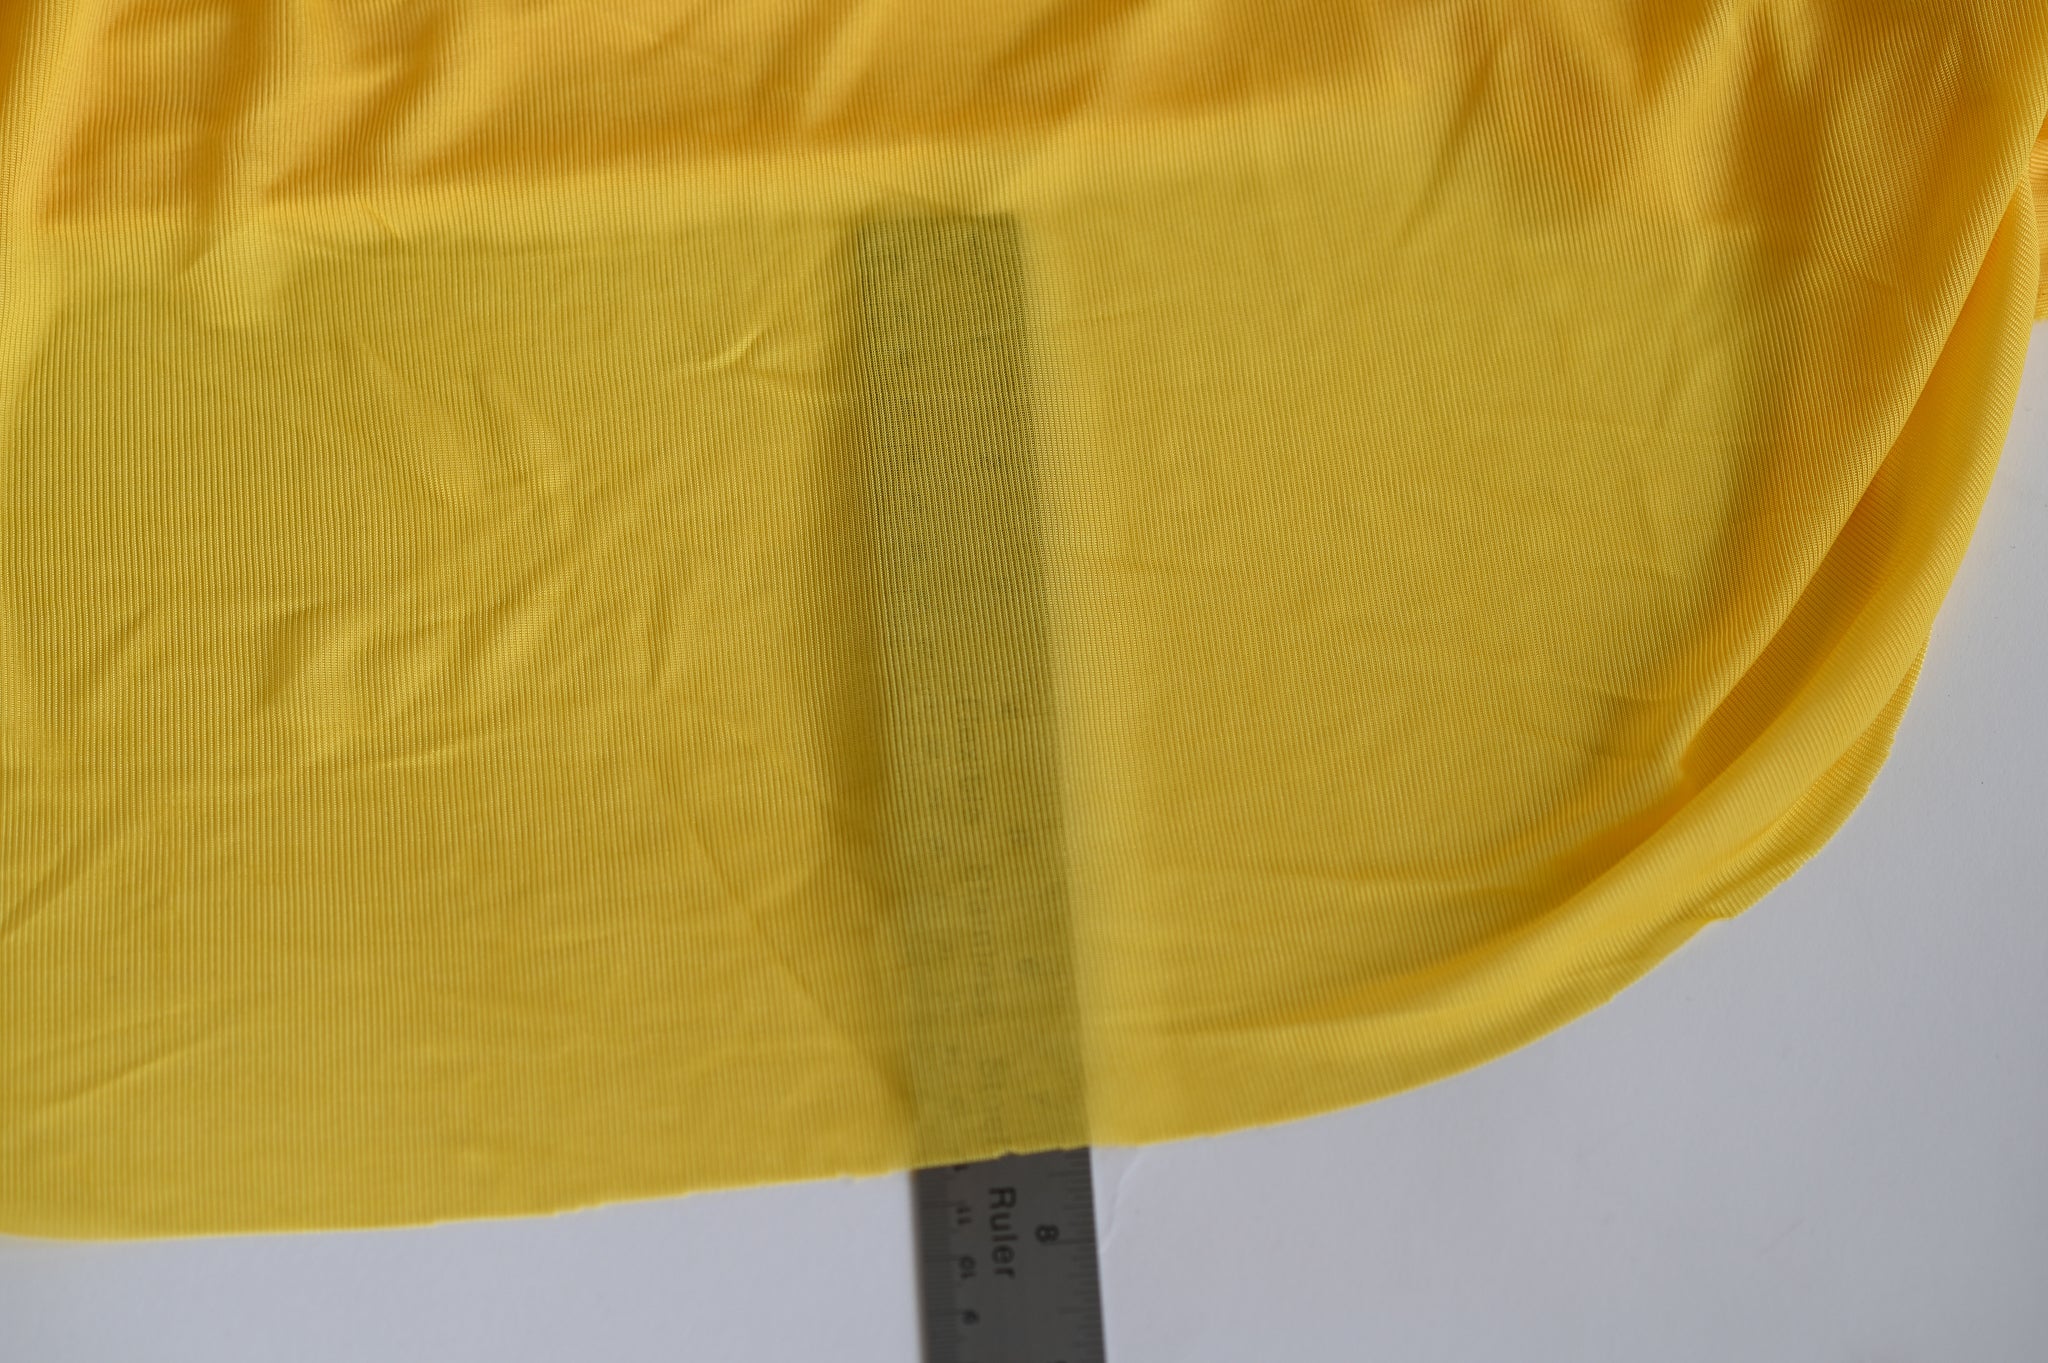 Drapey Confections (Yellow) - Viscose Jersey